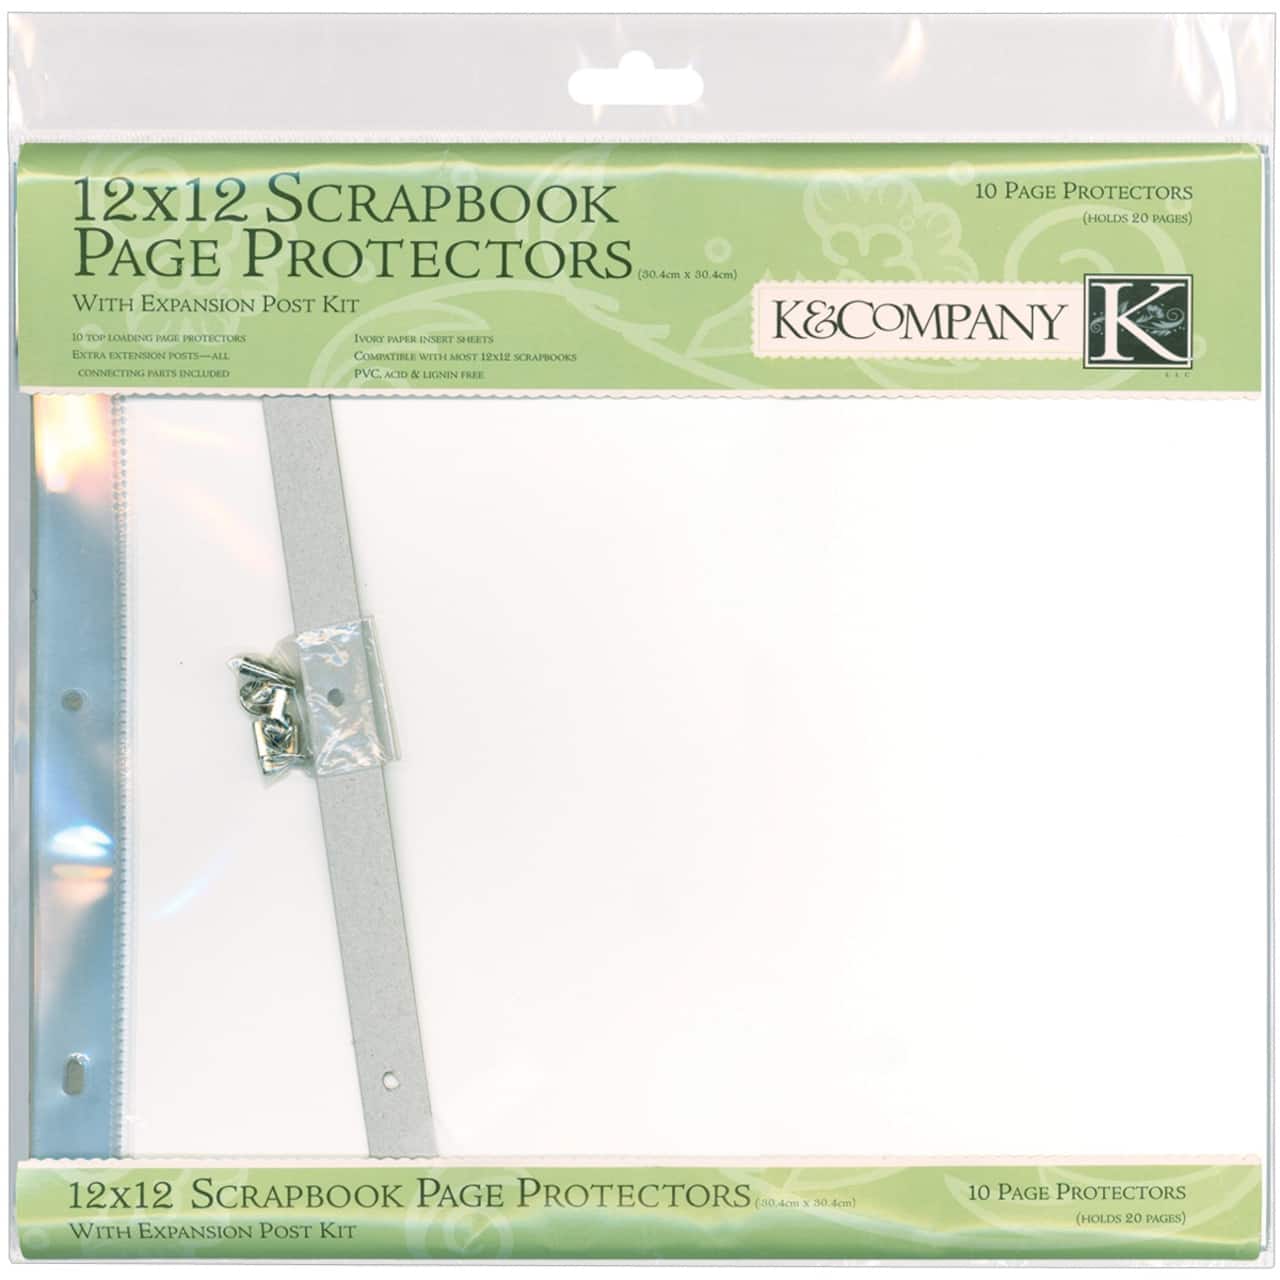 K & Company 12 x 12 Scrapbook Page Protectors with Expansion Post Kit